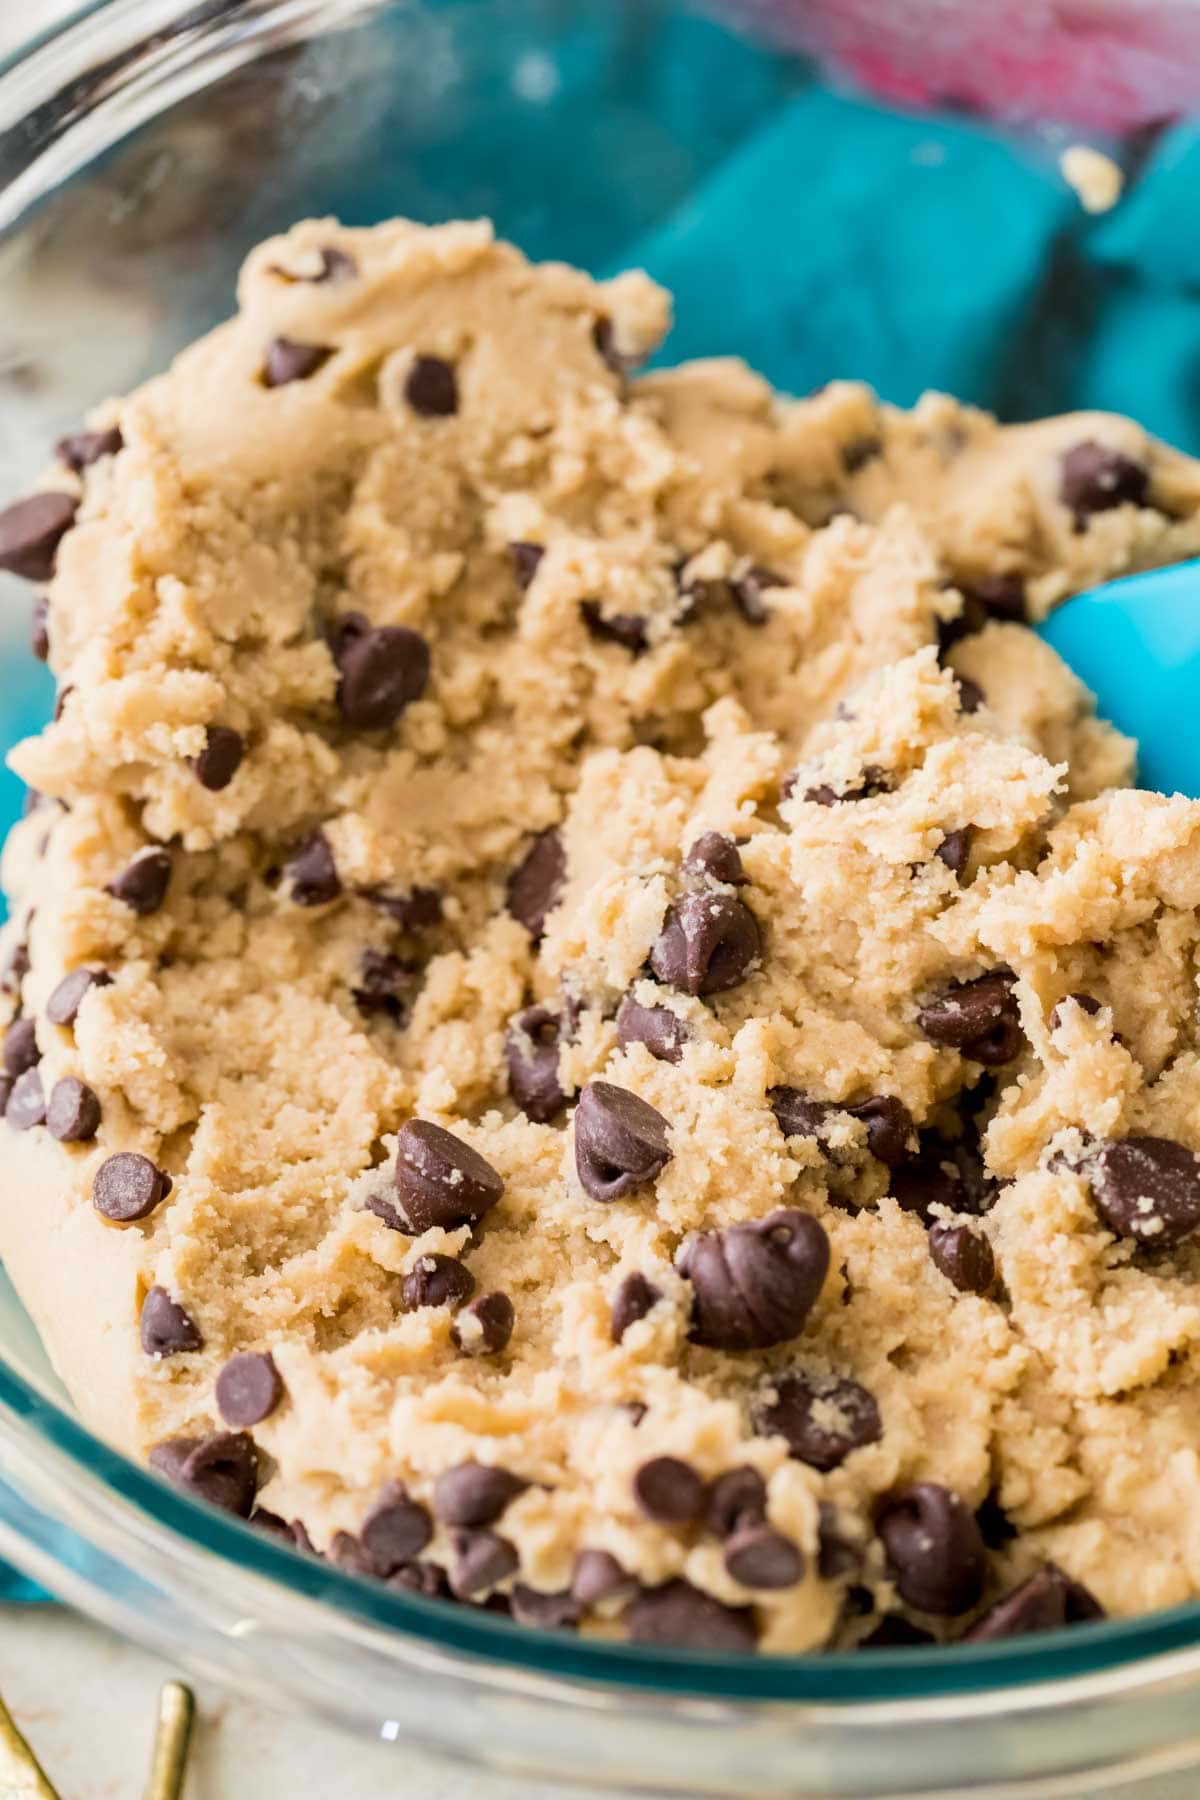 Close-up shot of an edible chocolate chip cookie dough in a bowl.